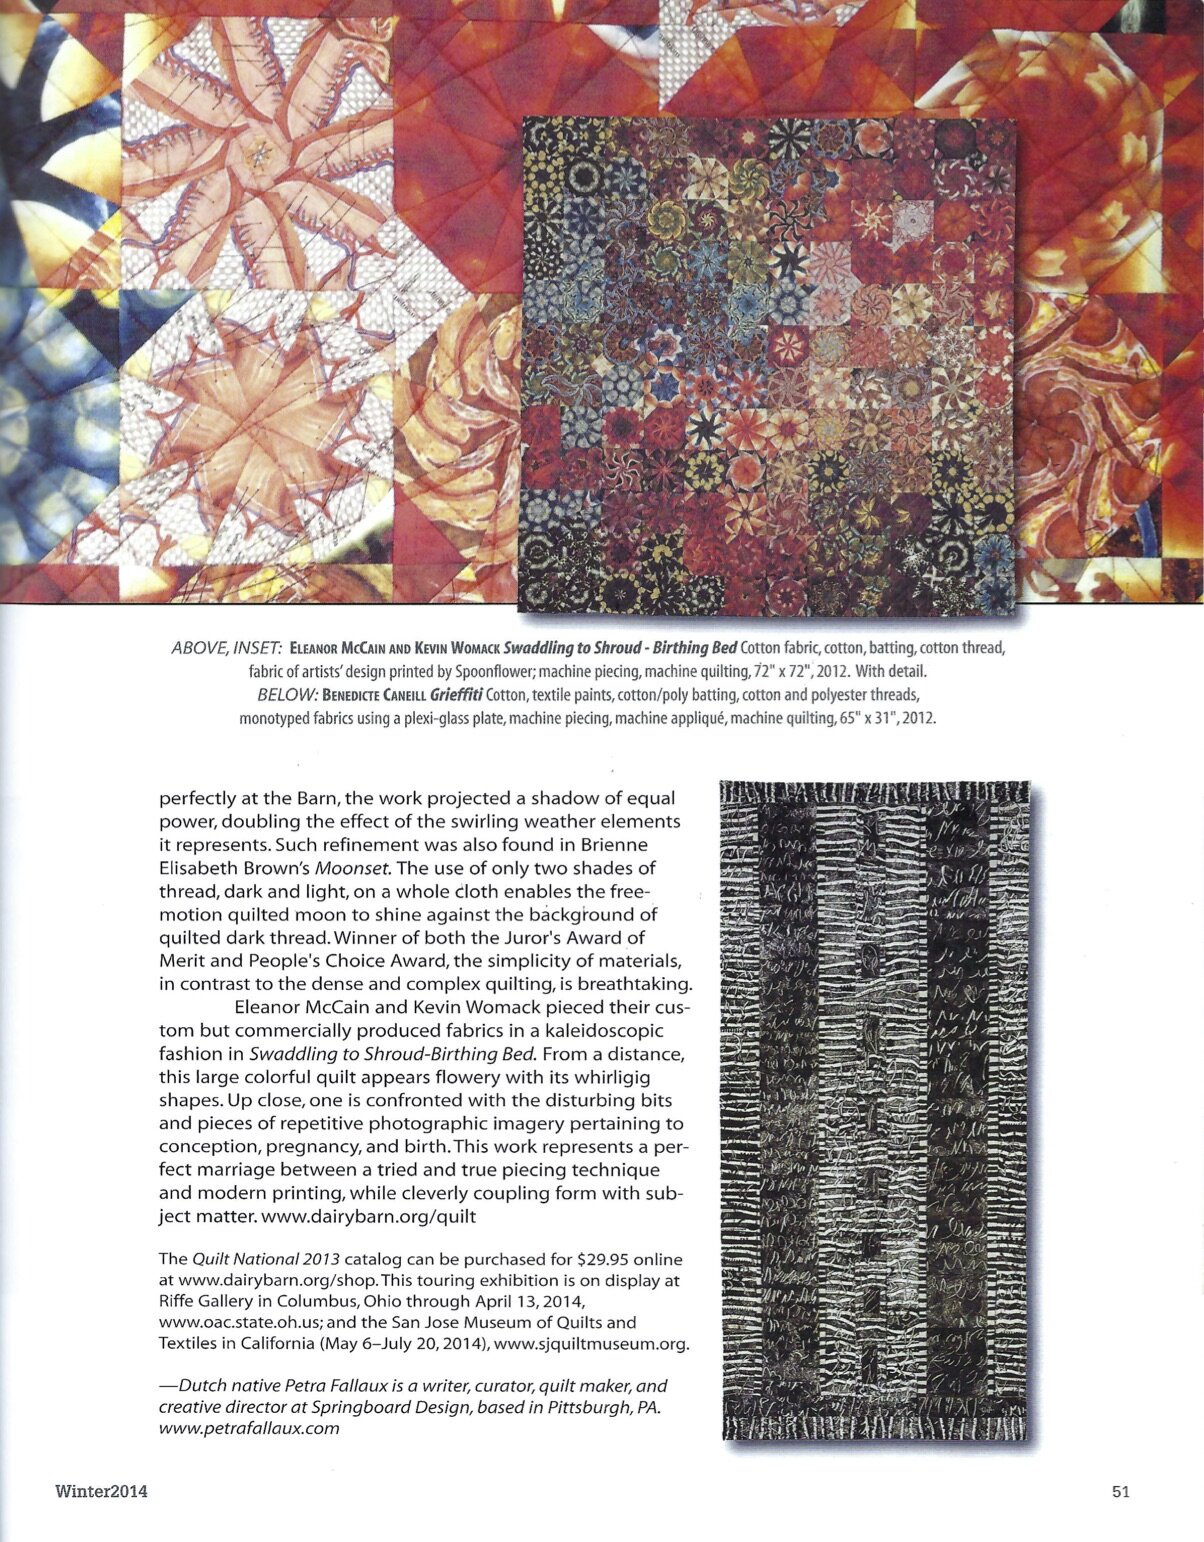 2Review Quilt National'13 SurfaceDesignJournal.jpg